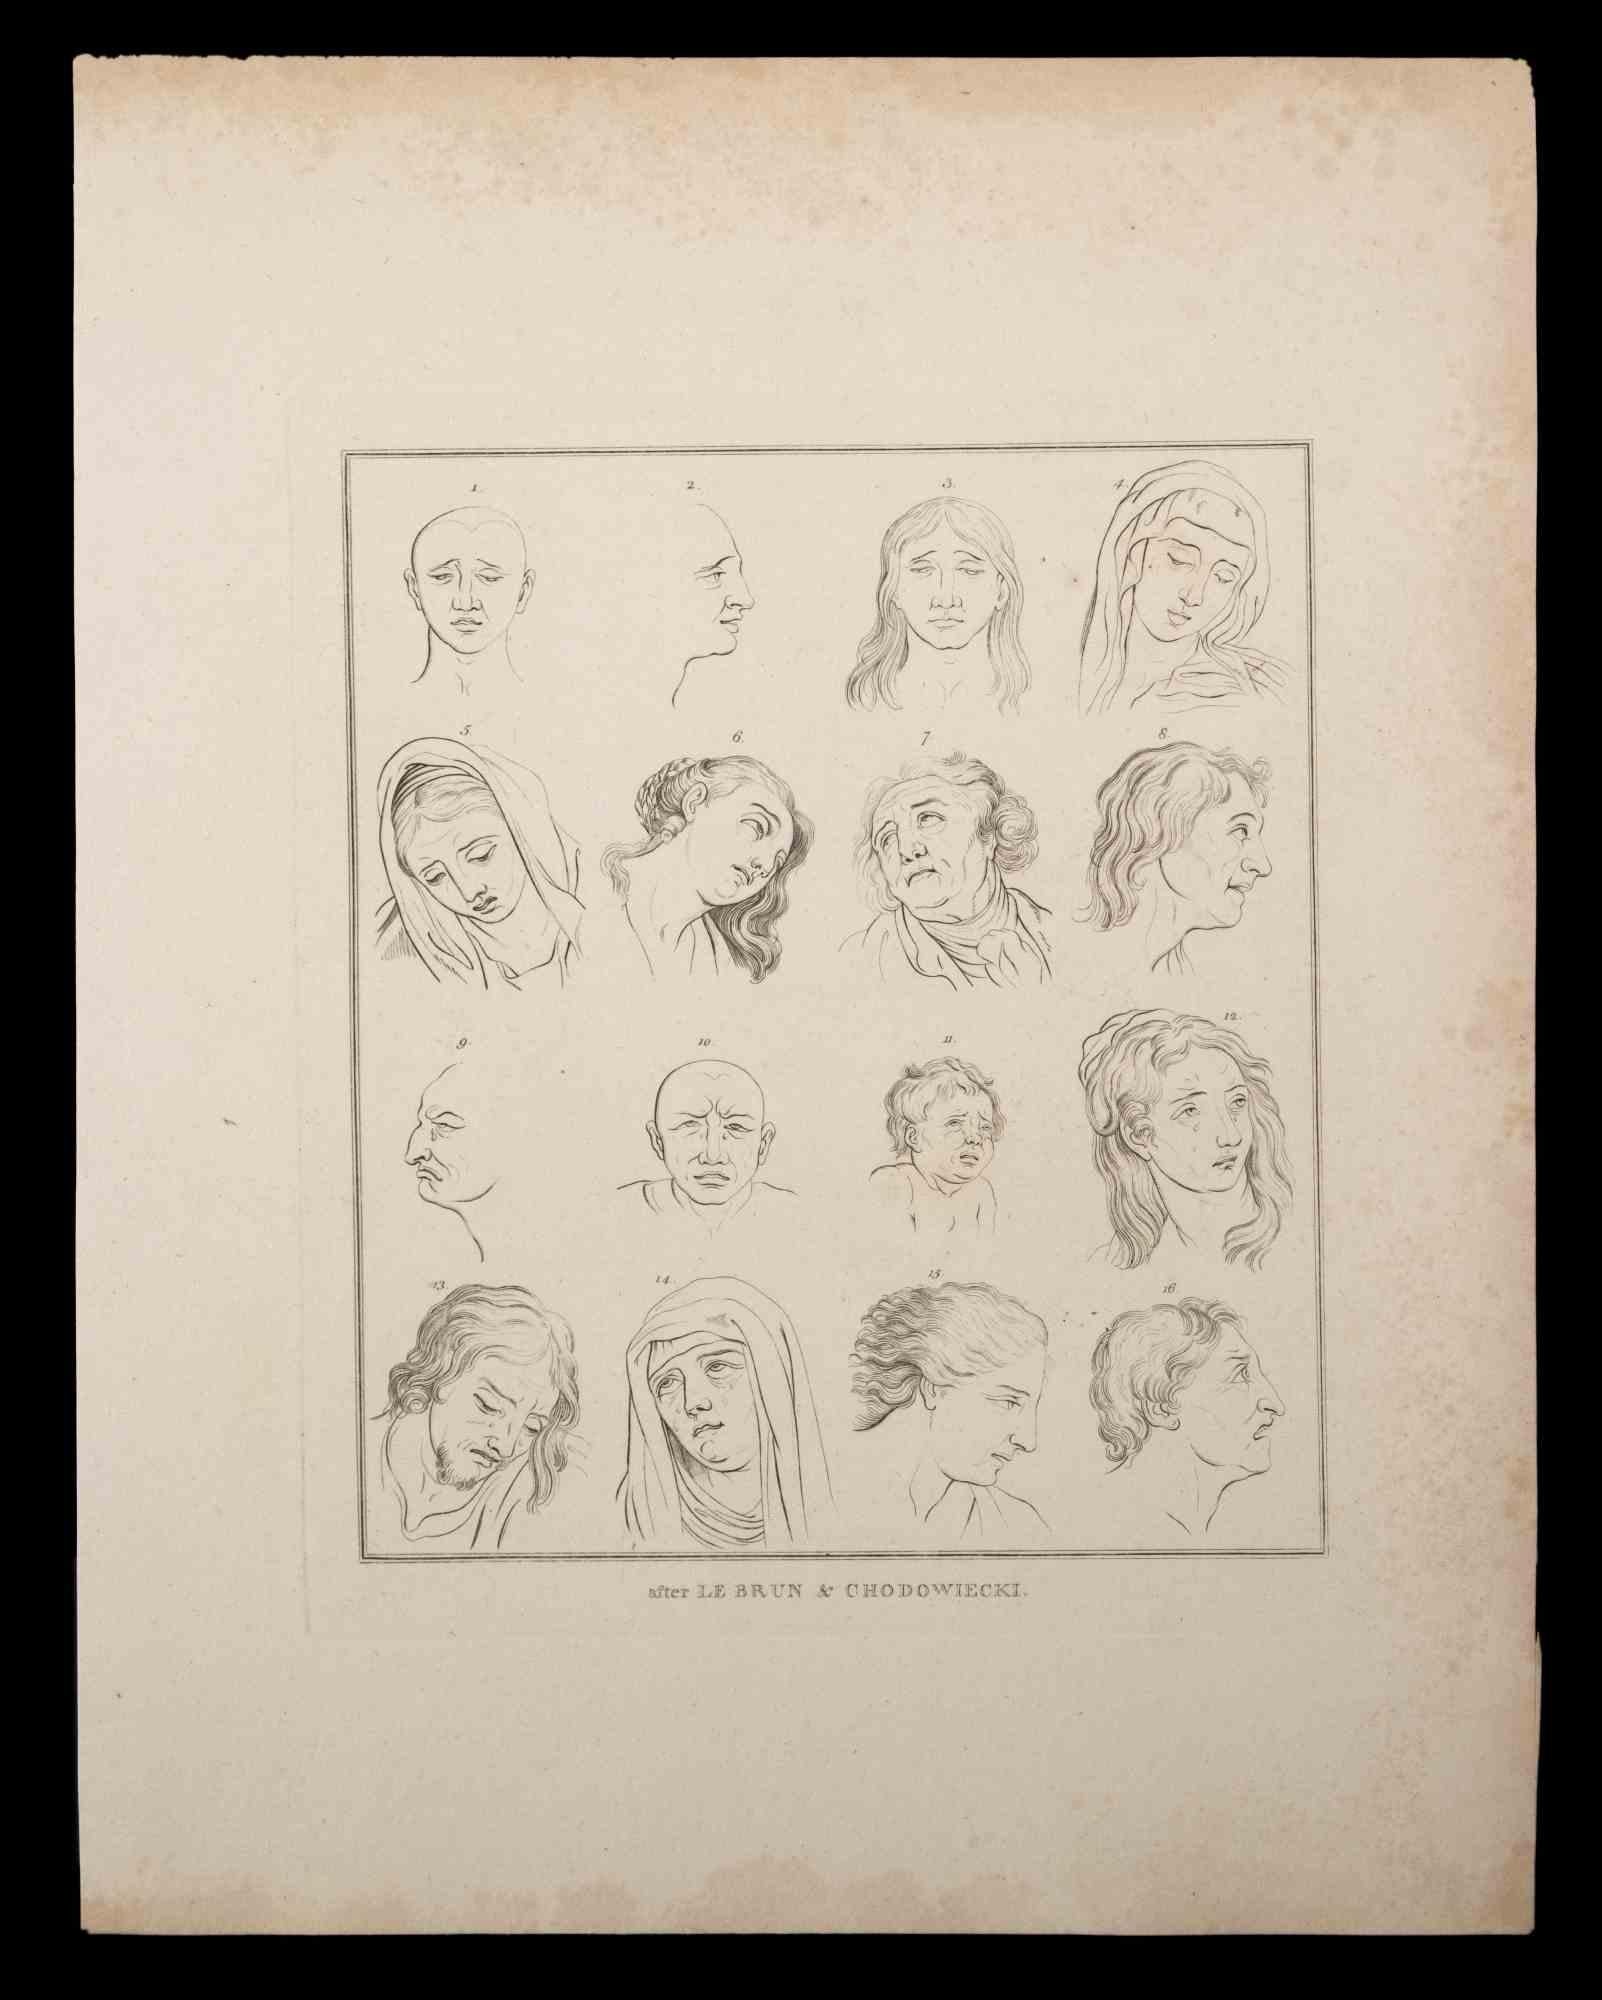 Portrait of men and women is an original etching realized by Thomas Holloway after Lebrun and Chodowiecki for Johann Caspar Lavater's "Essays on Physiognomy, Designed to Promote the Knowledge and the Love of Mankind", London, Bensley, 1810. 

Signed